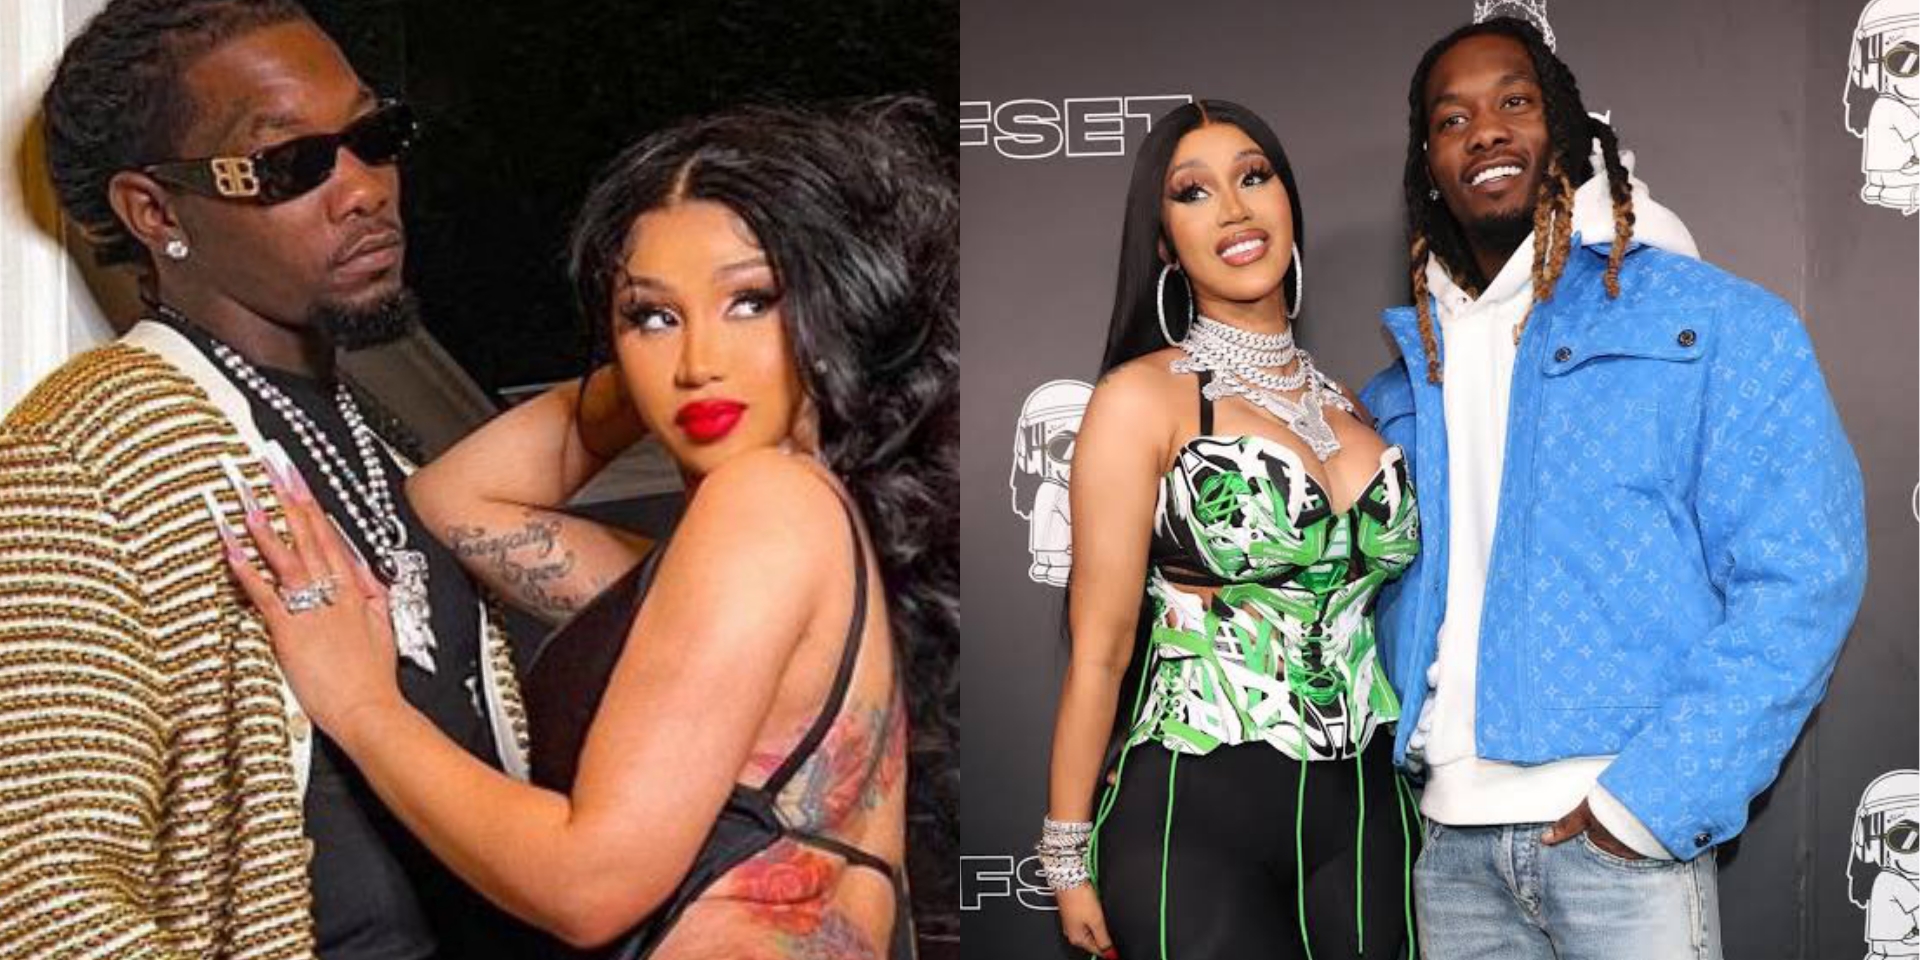 Reactions trail Offset and Cardi B’s intimate moment